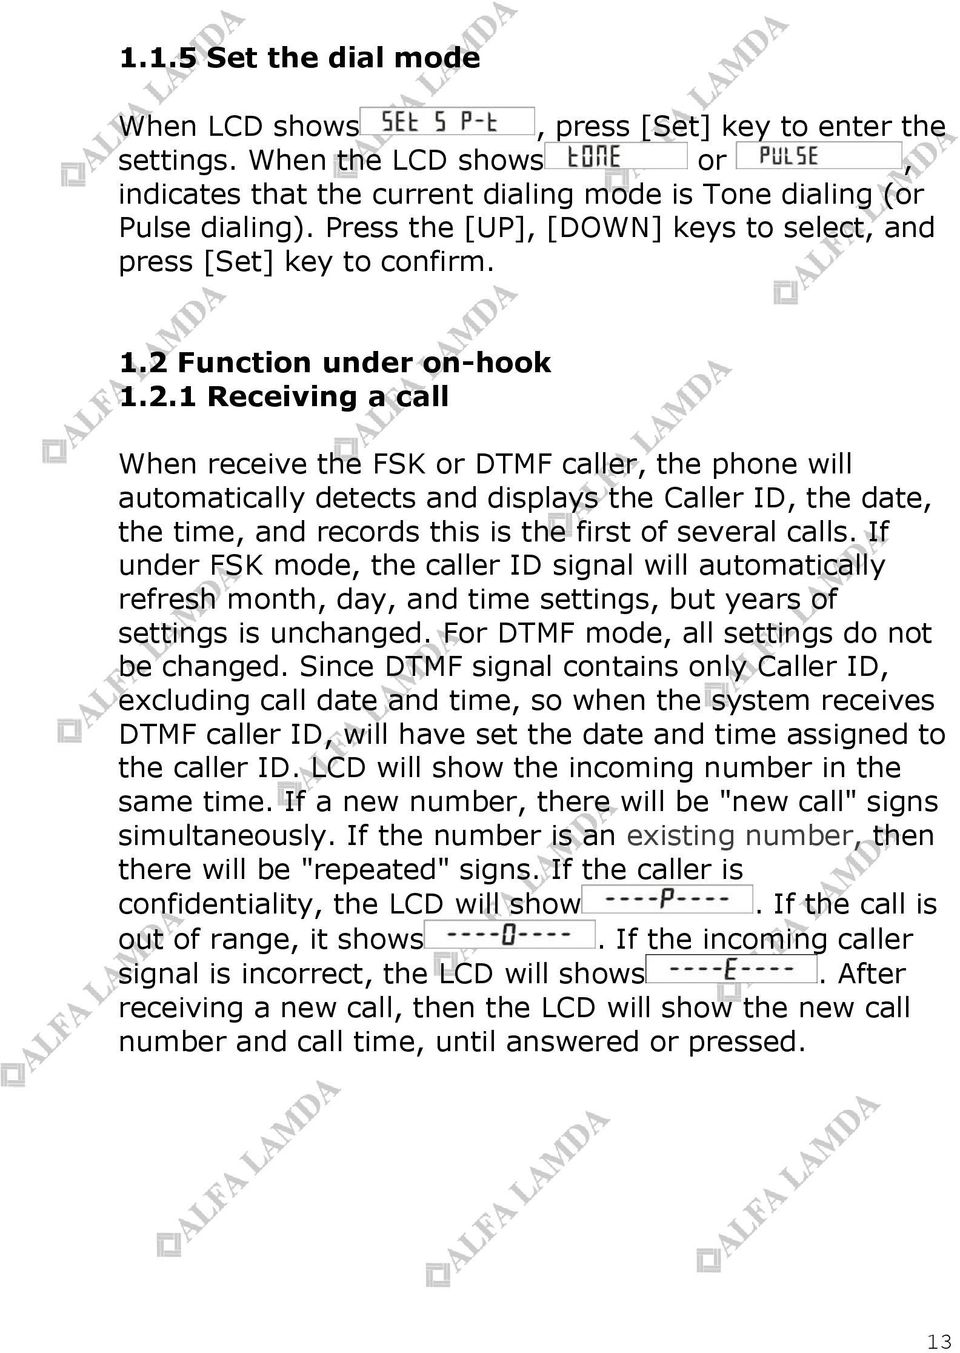 Function under on-hook 1.2.